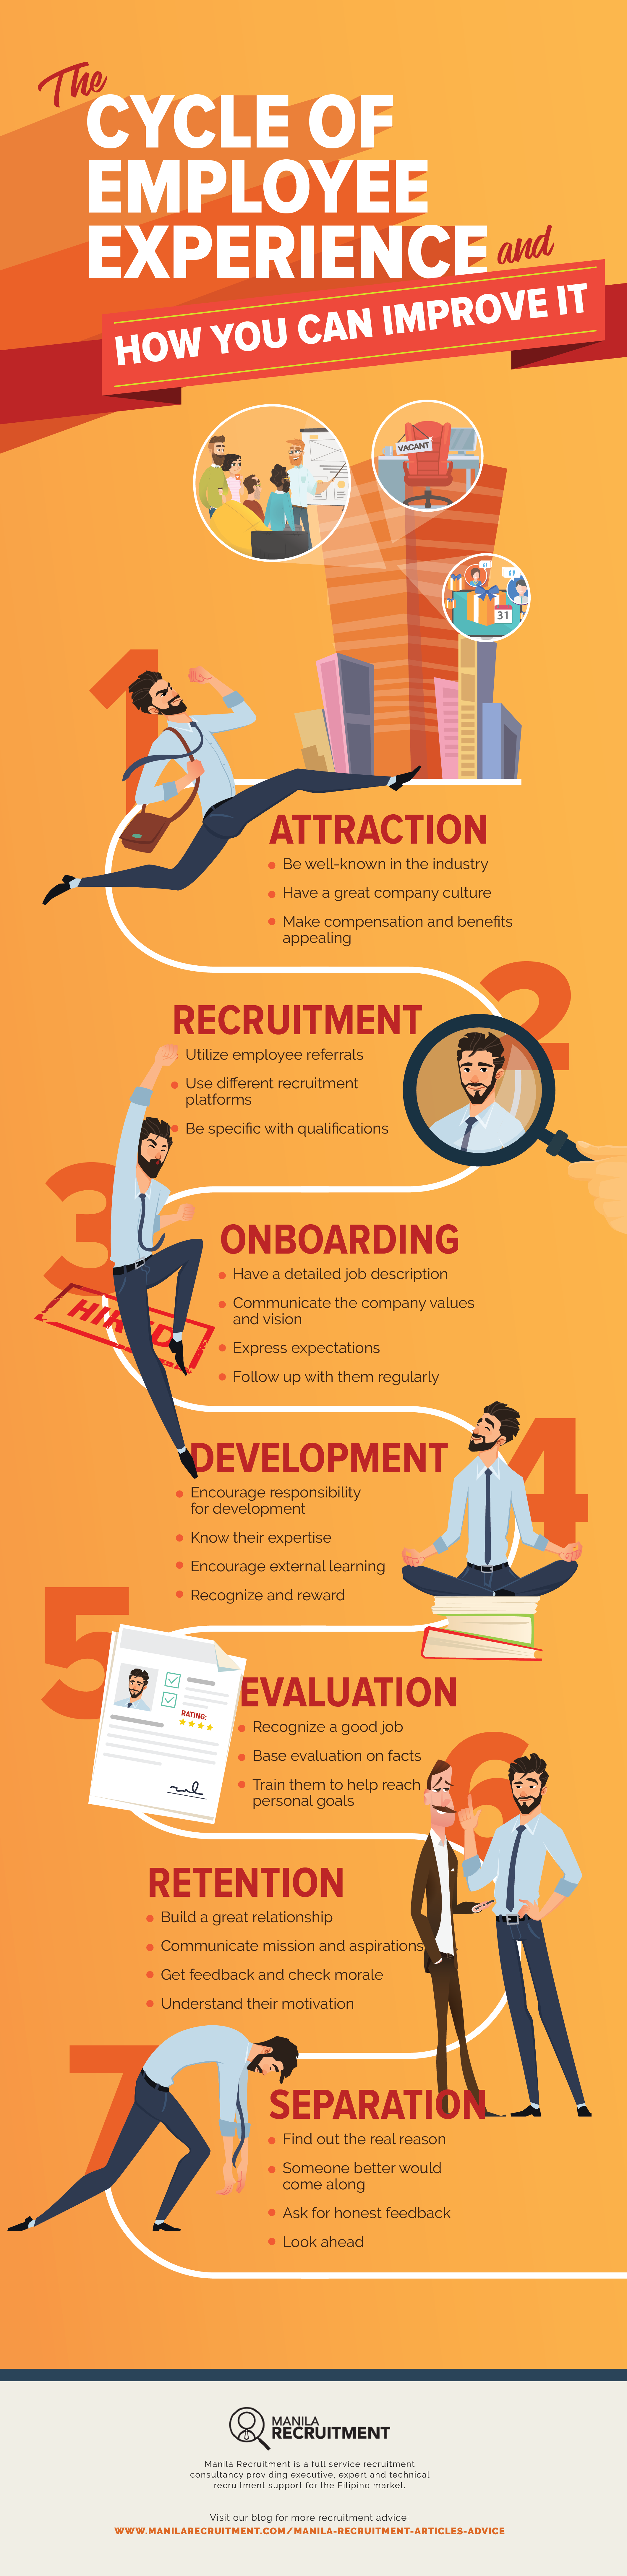 The Cycle of Employee Experience- Infographic